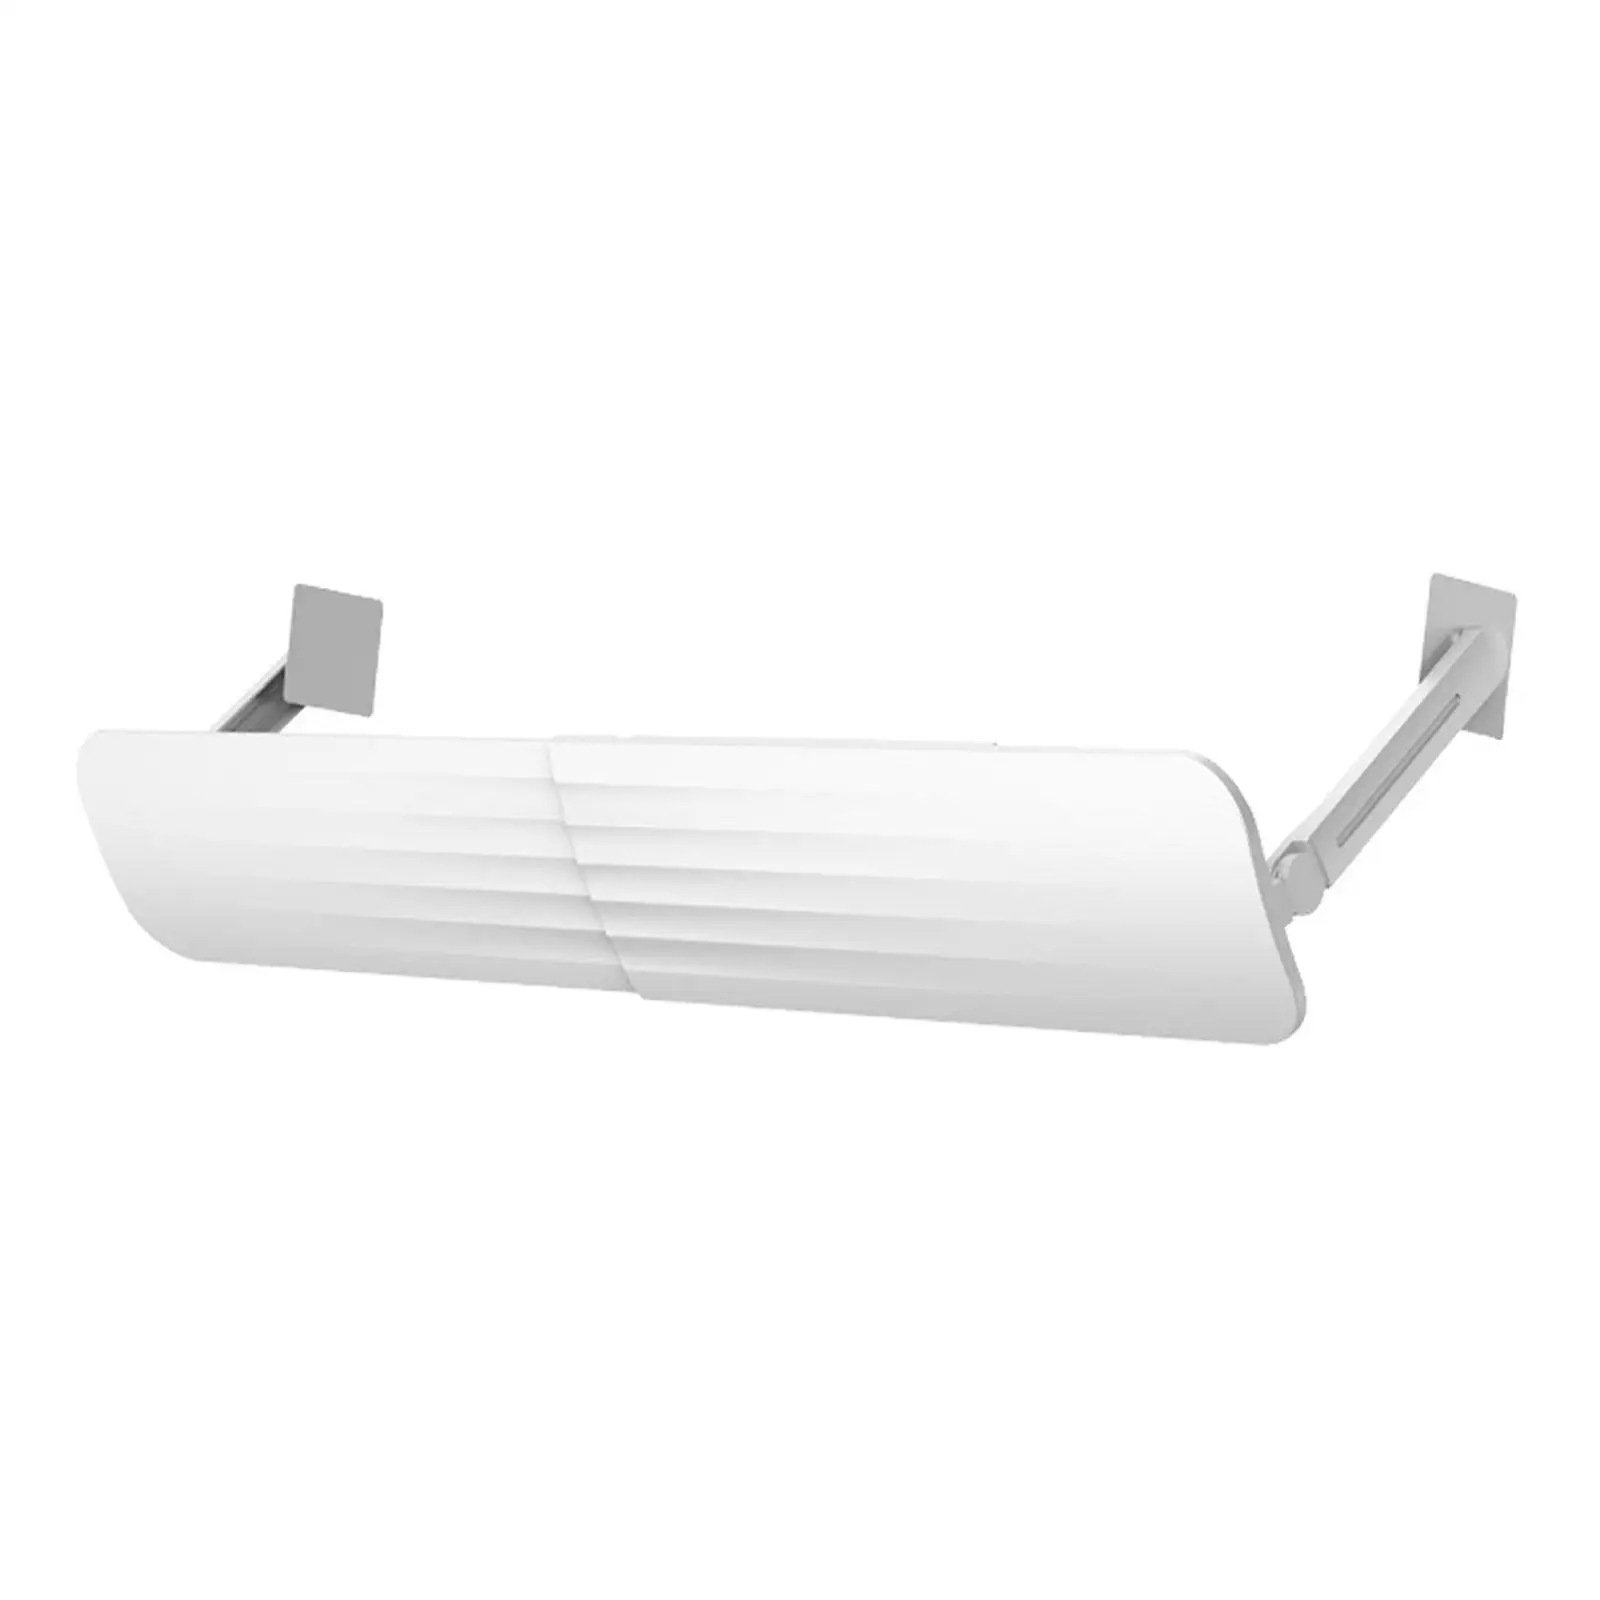 Air Conditioner Deflector Multifunction for Hotel Hanging Air Conditioner